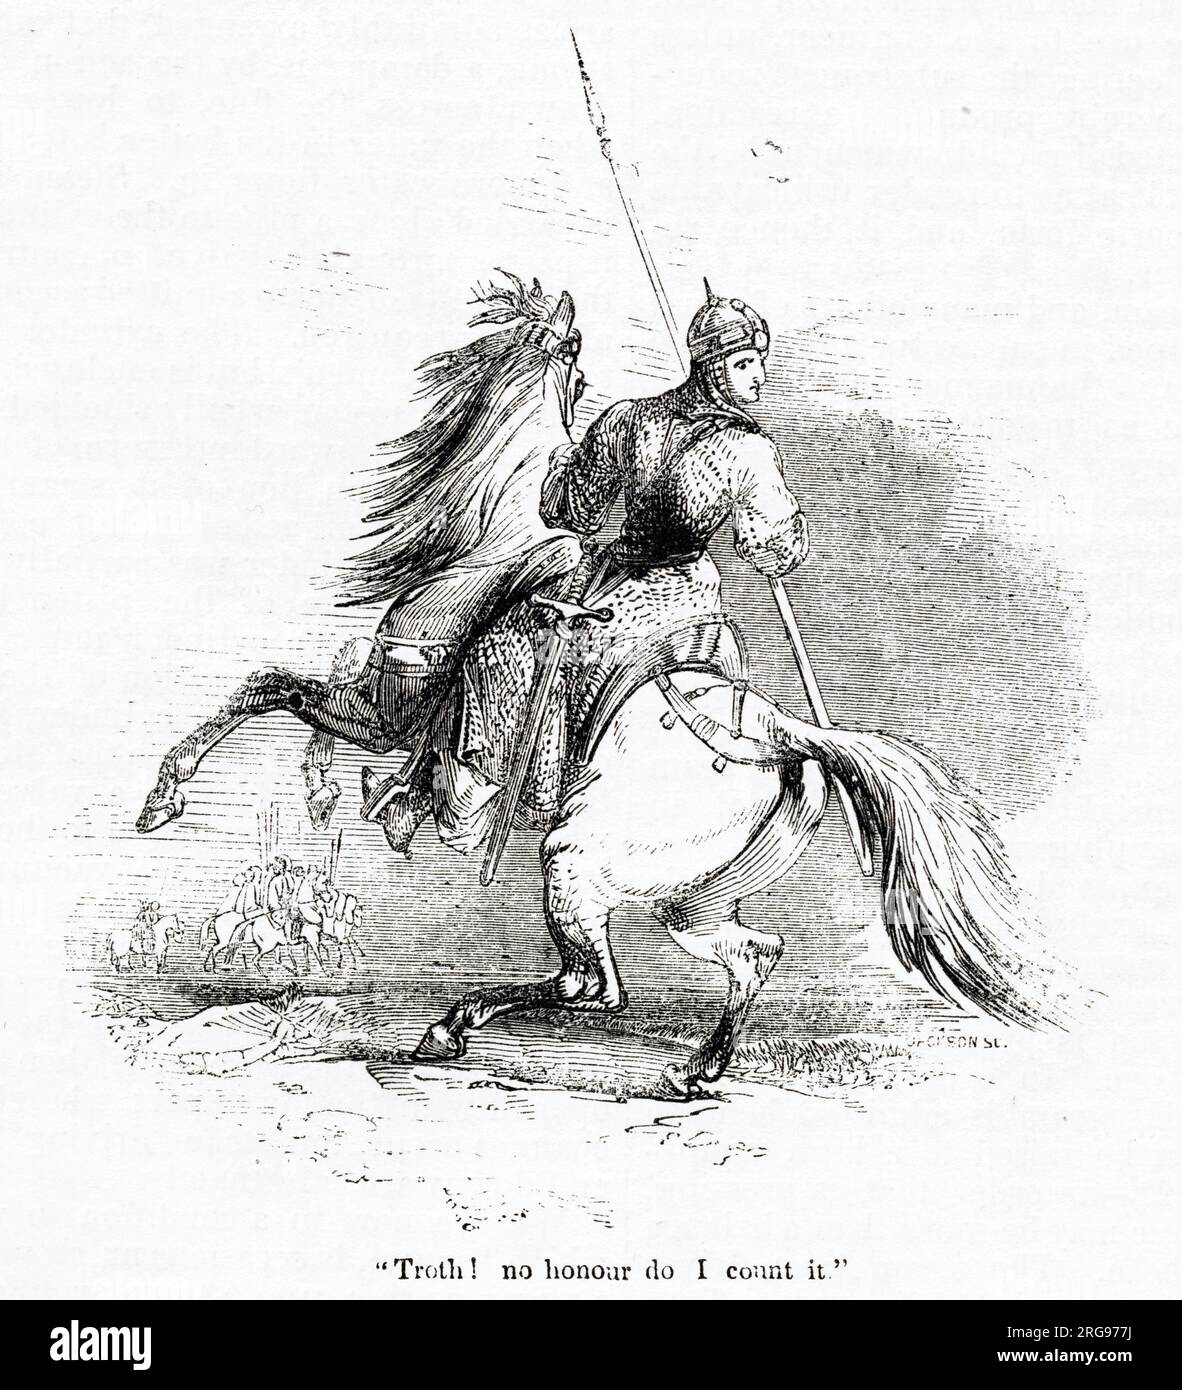 Illustration from the life of El Cid, Rodrigo Diaz de Vivar (c1043-1099), Castilian nobleman and military leader in medieval Spain - seen here on his war horse. He was immortalised in a 12th century Spanish epic poem, El Cantar de Mio Cid, and is the subject of a play by Pierre Corneille, an opera by Jules Massenet, and a film starring Charlton Heston. Stock Photo